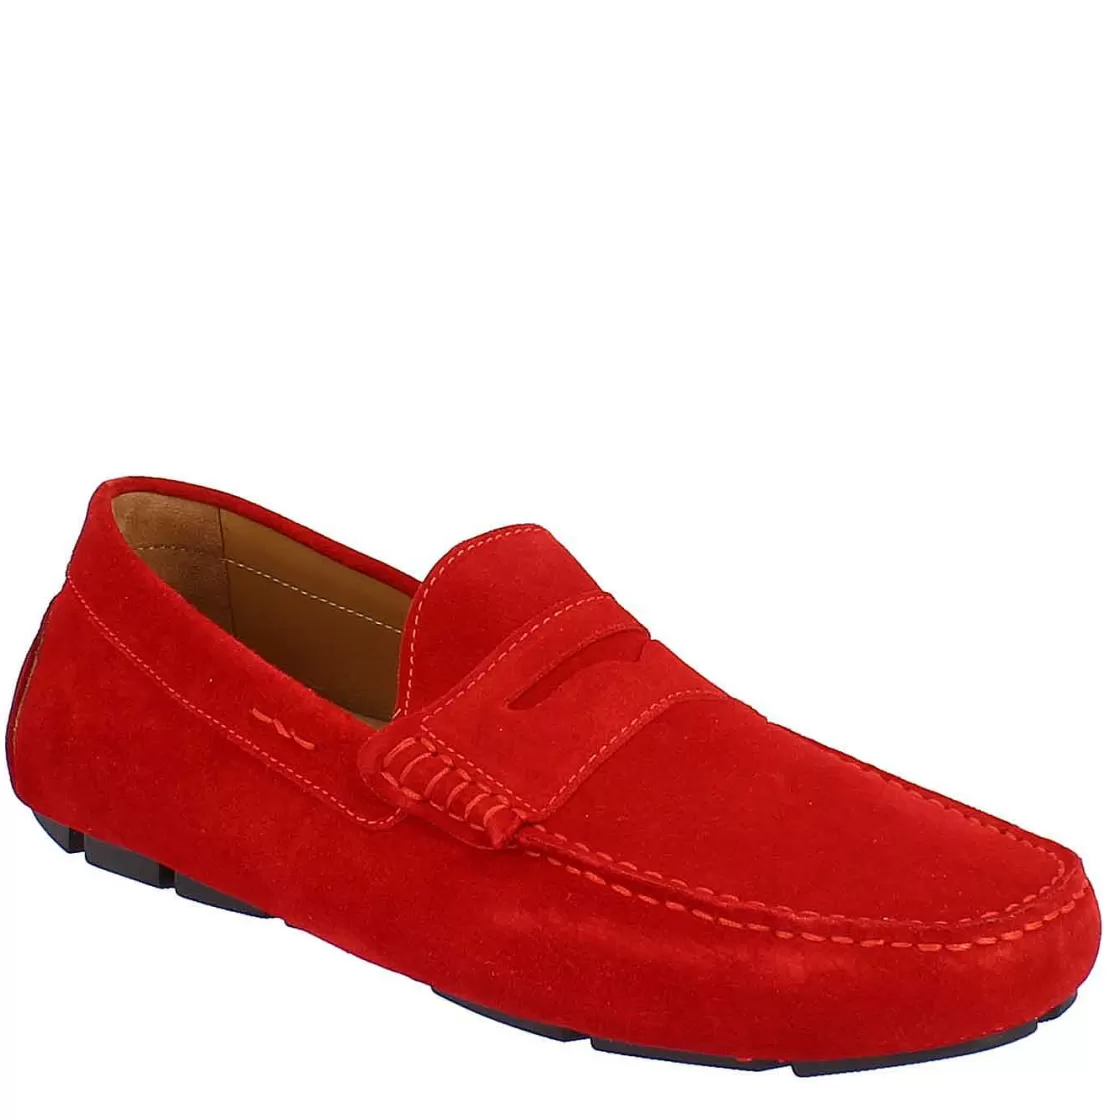 Leonardo Handmade Men'S Carshoe Loafers In Leather Red Suede. Hot